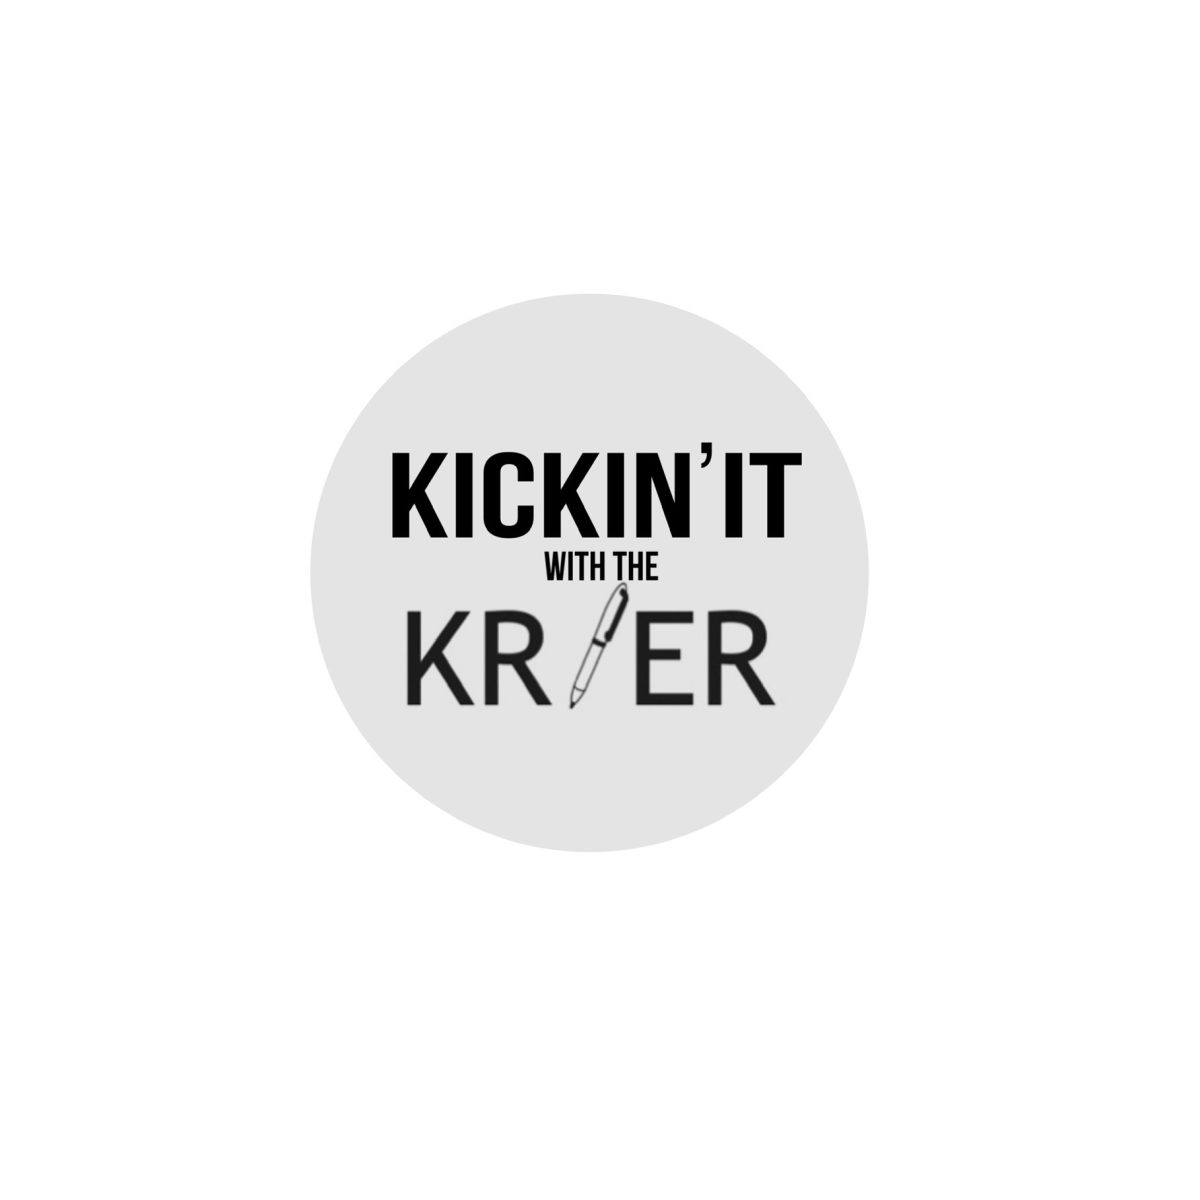 Kickin’ it with the Krier Episode 2